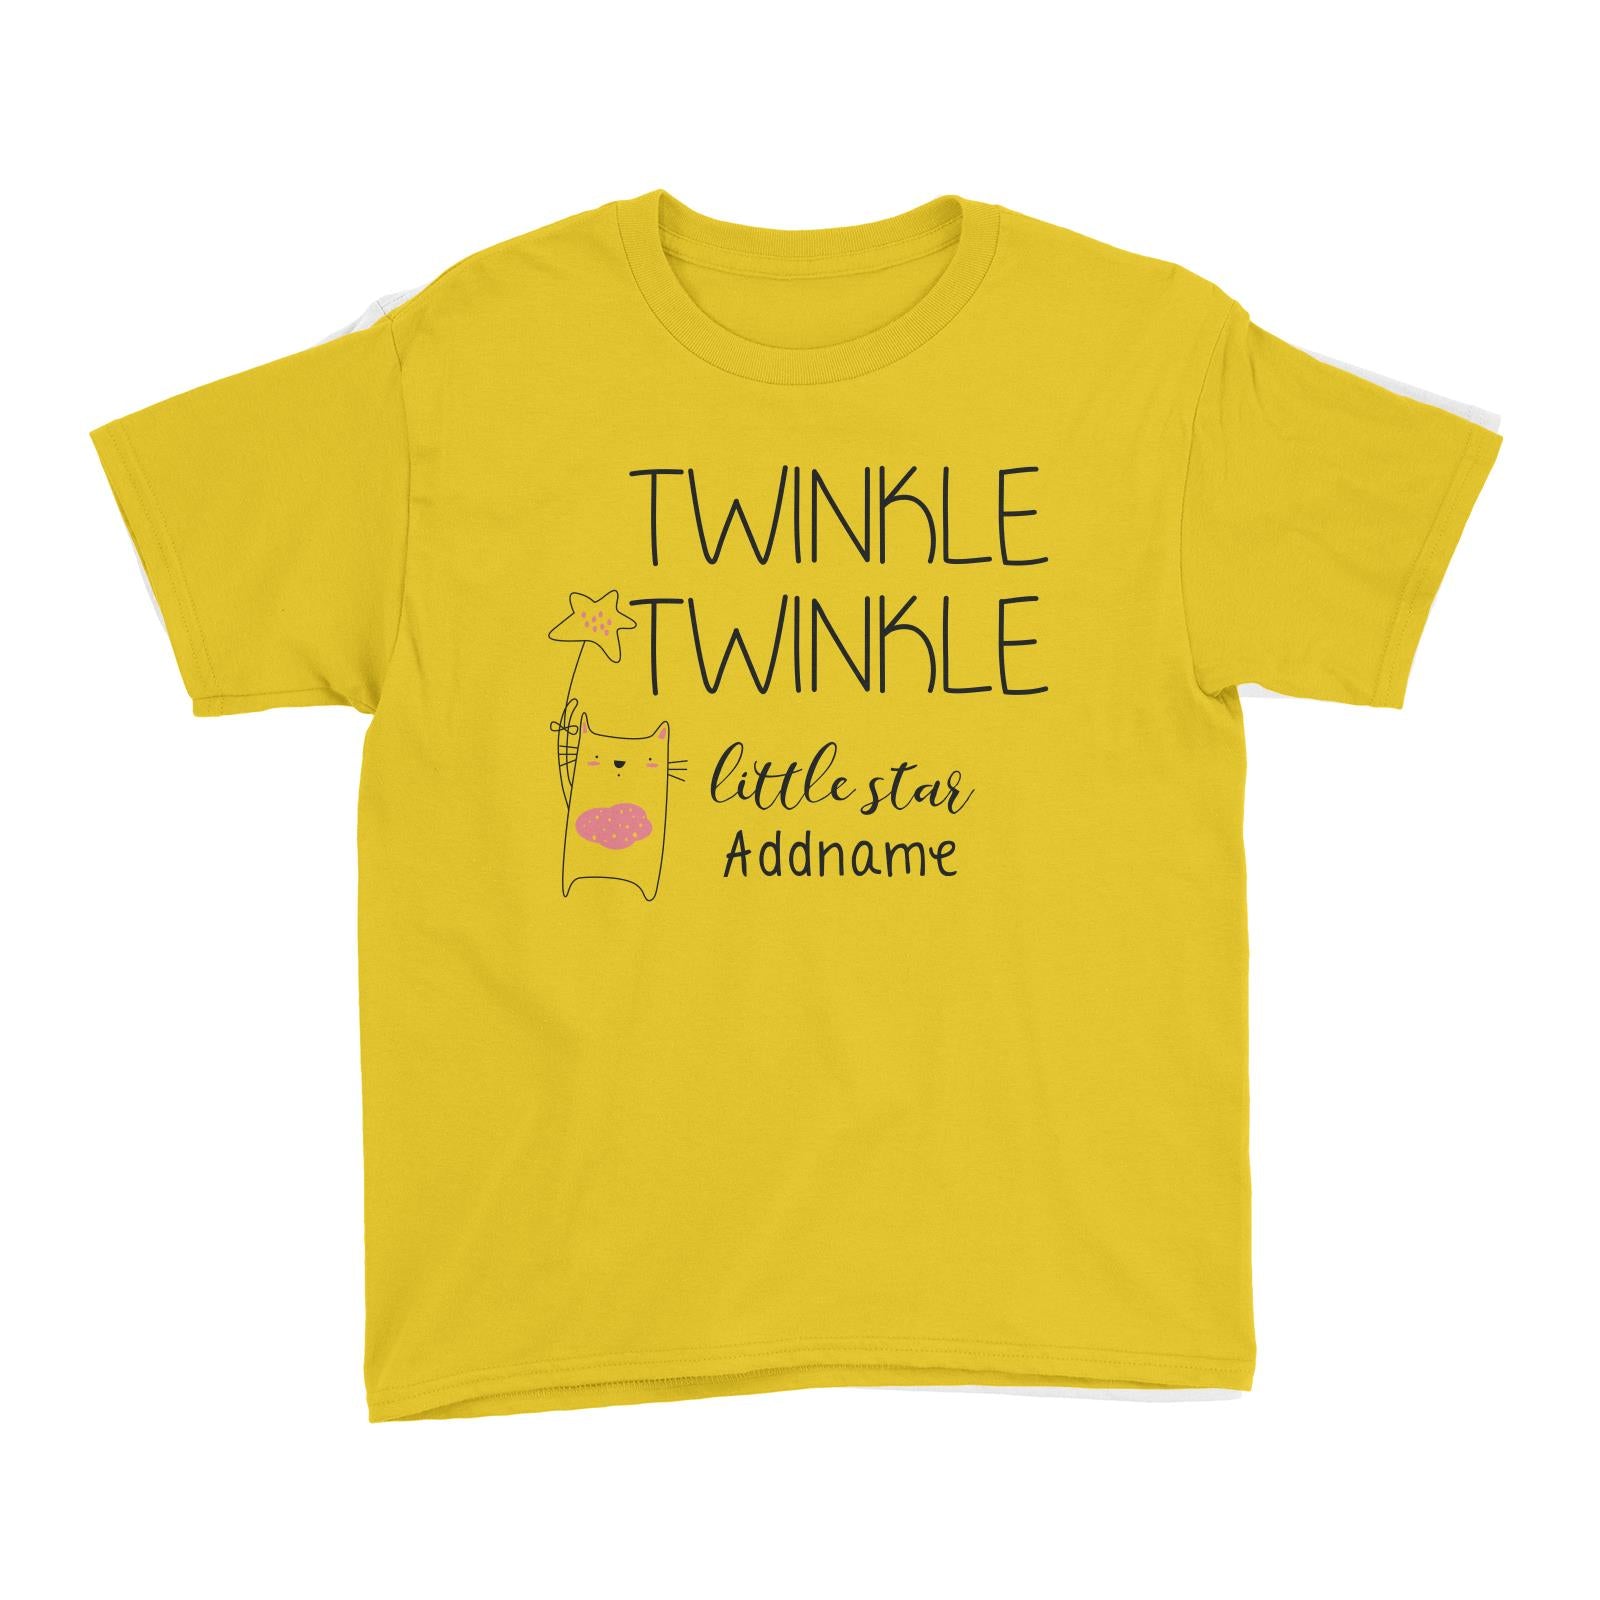 Cute Animals and Friends Series 2 Cat Twinkle Twinkle Little Star Addname Kid's T-Shirt